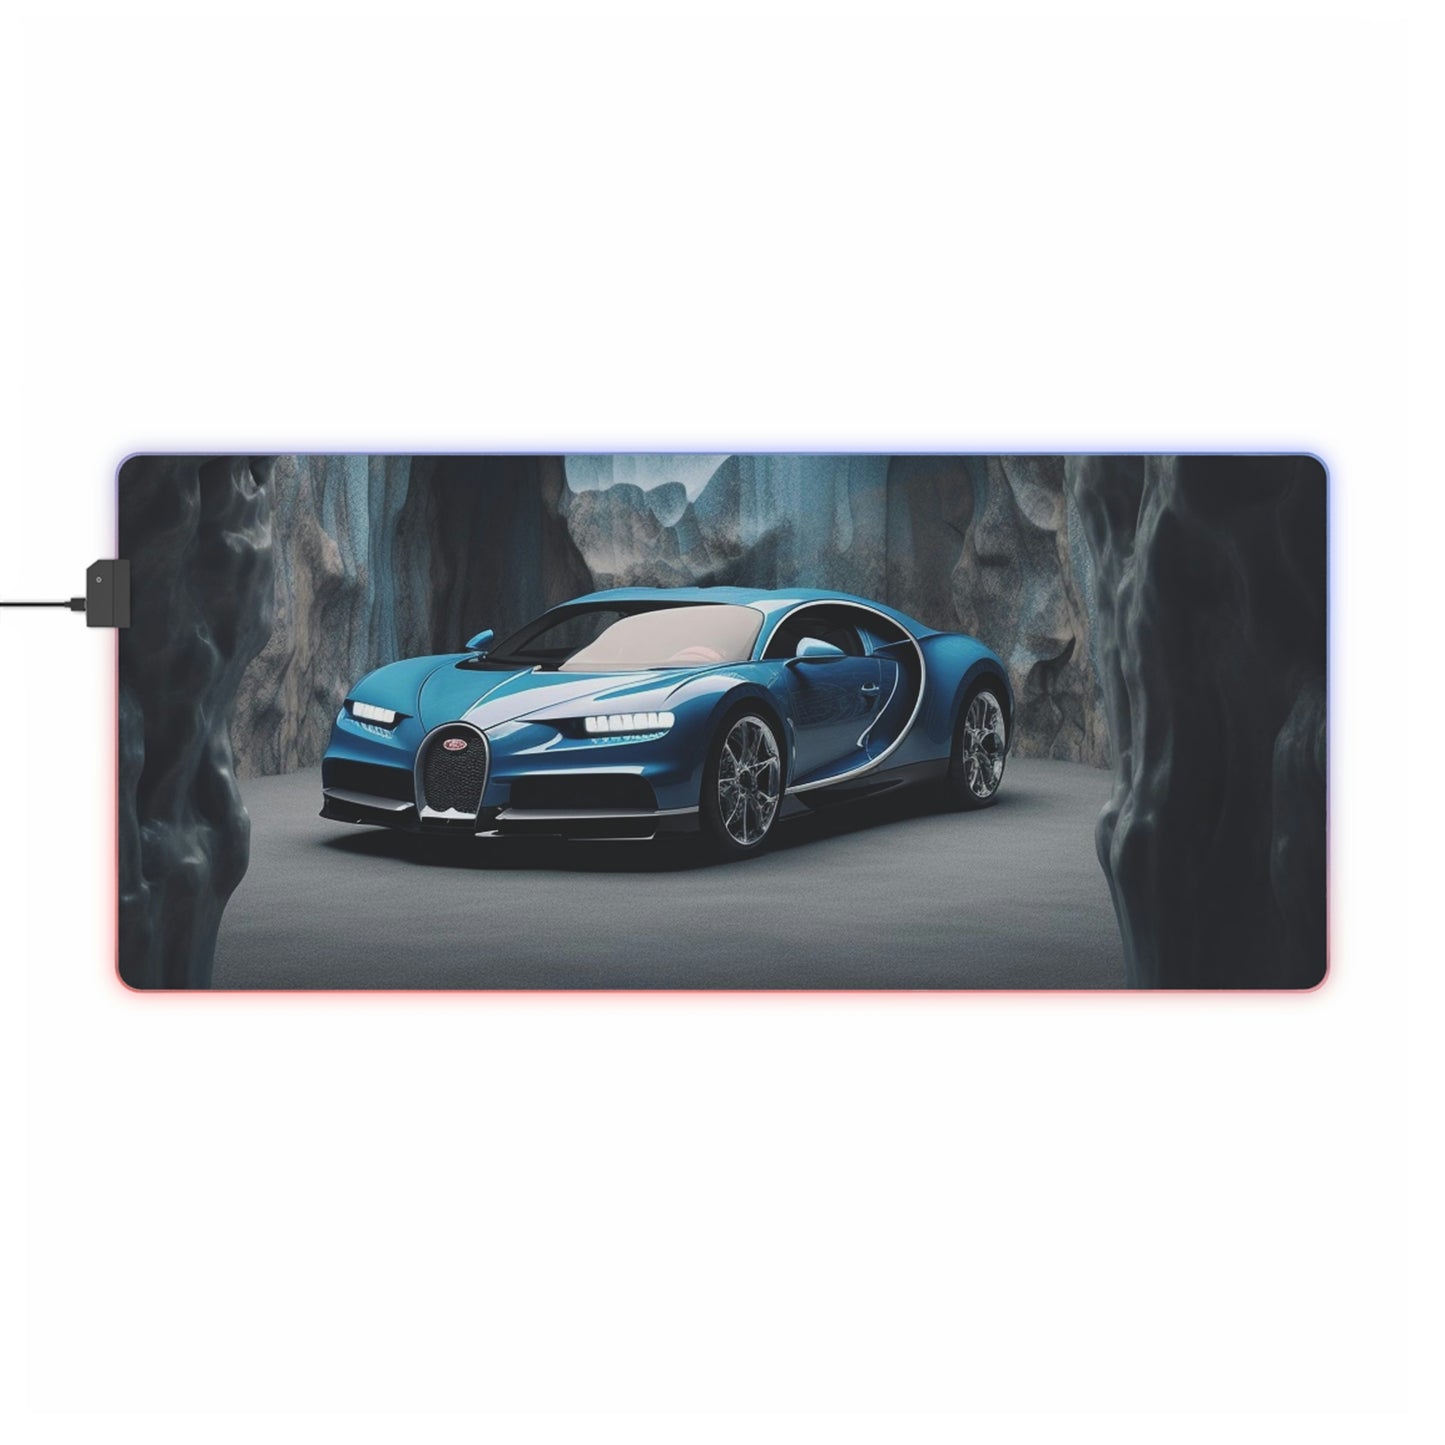 LED Gaming Mouse Pad Bugatti Real Look 2